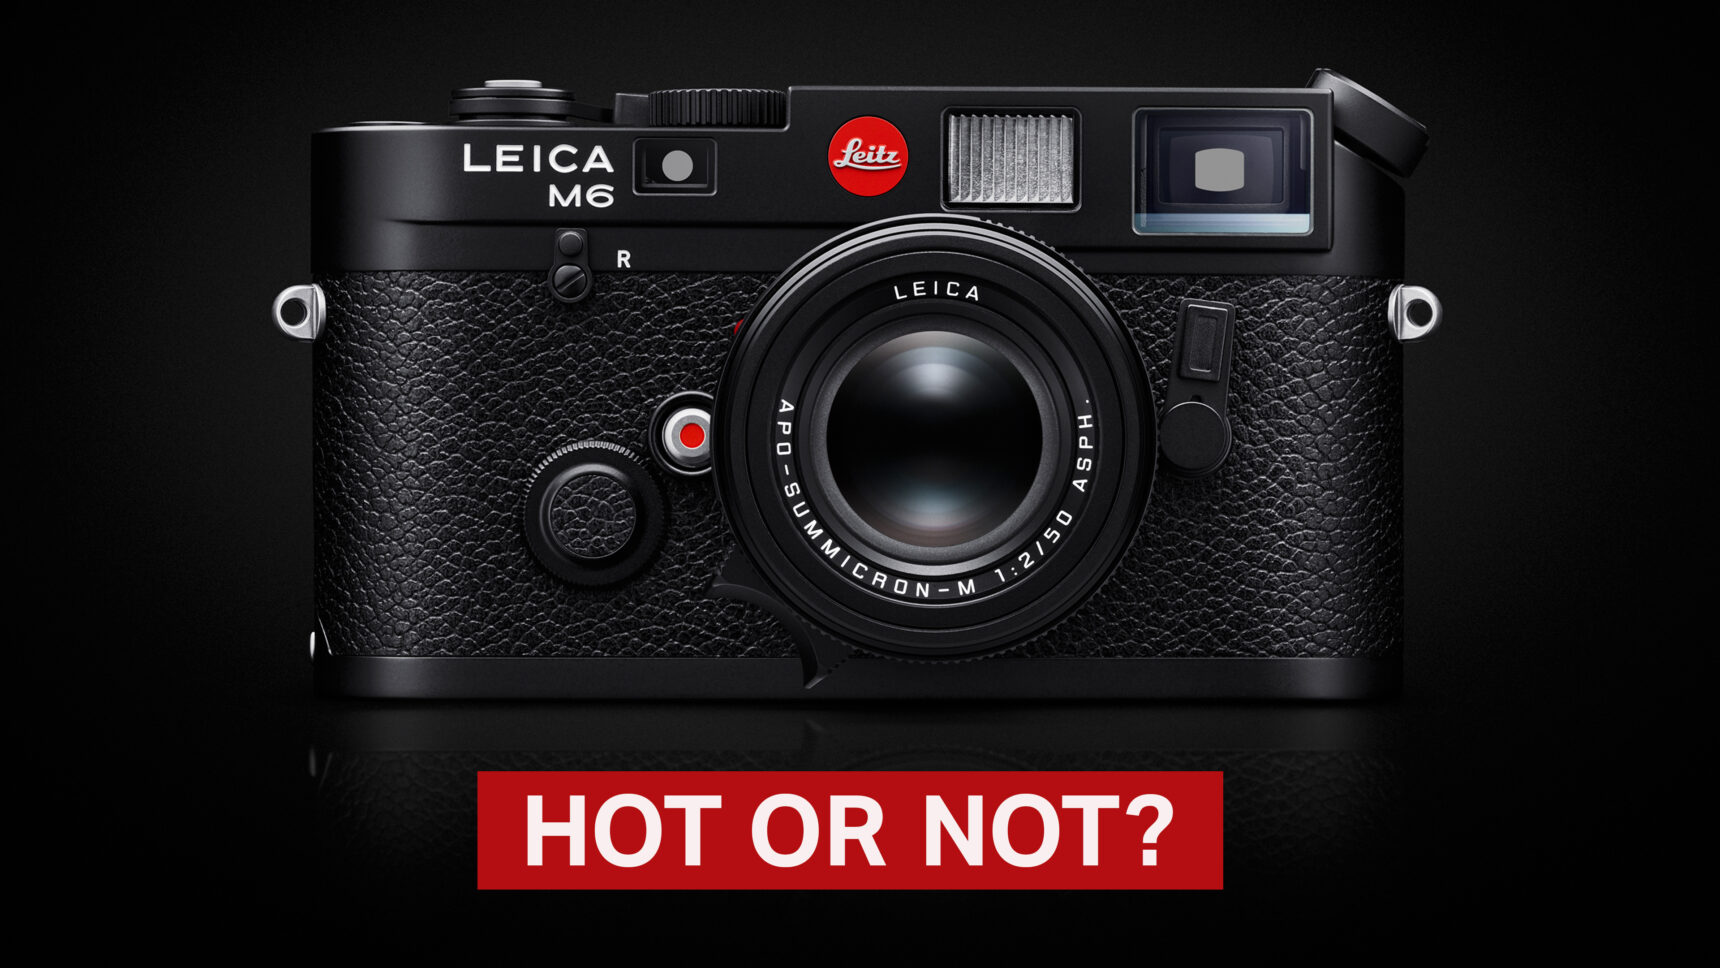 Leica M6 35mm Film Camera Review » Shoot It With Film